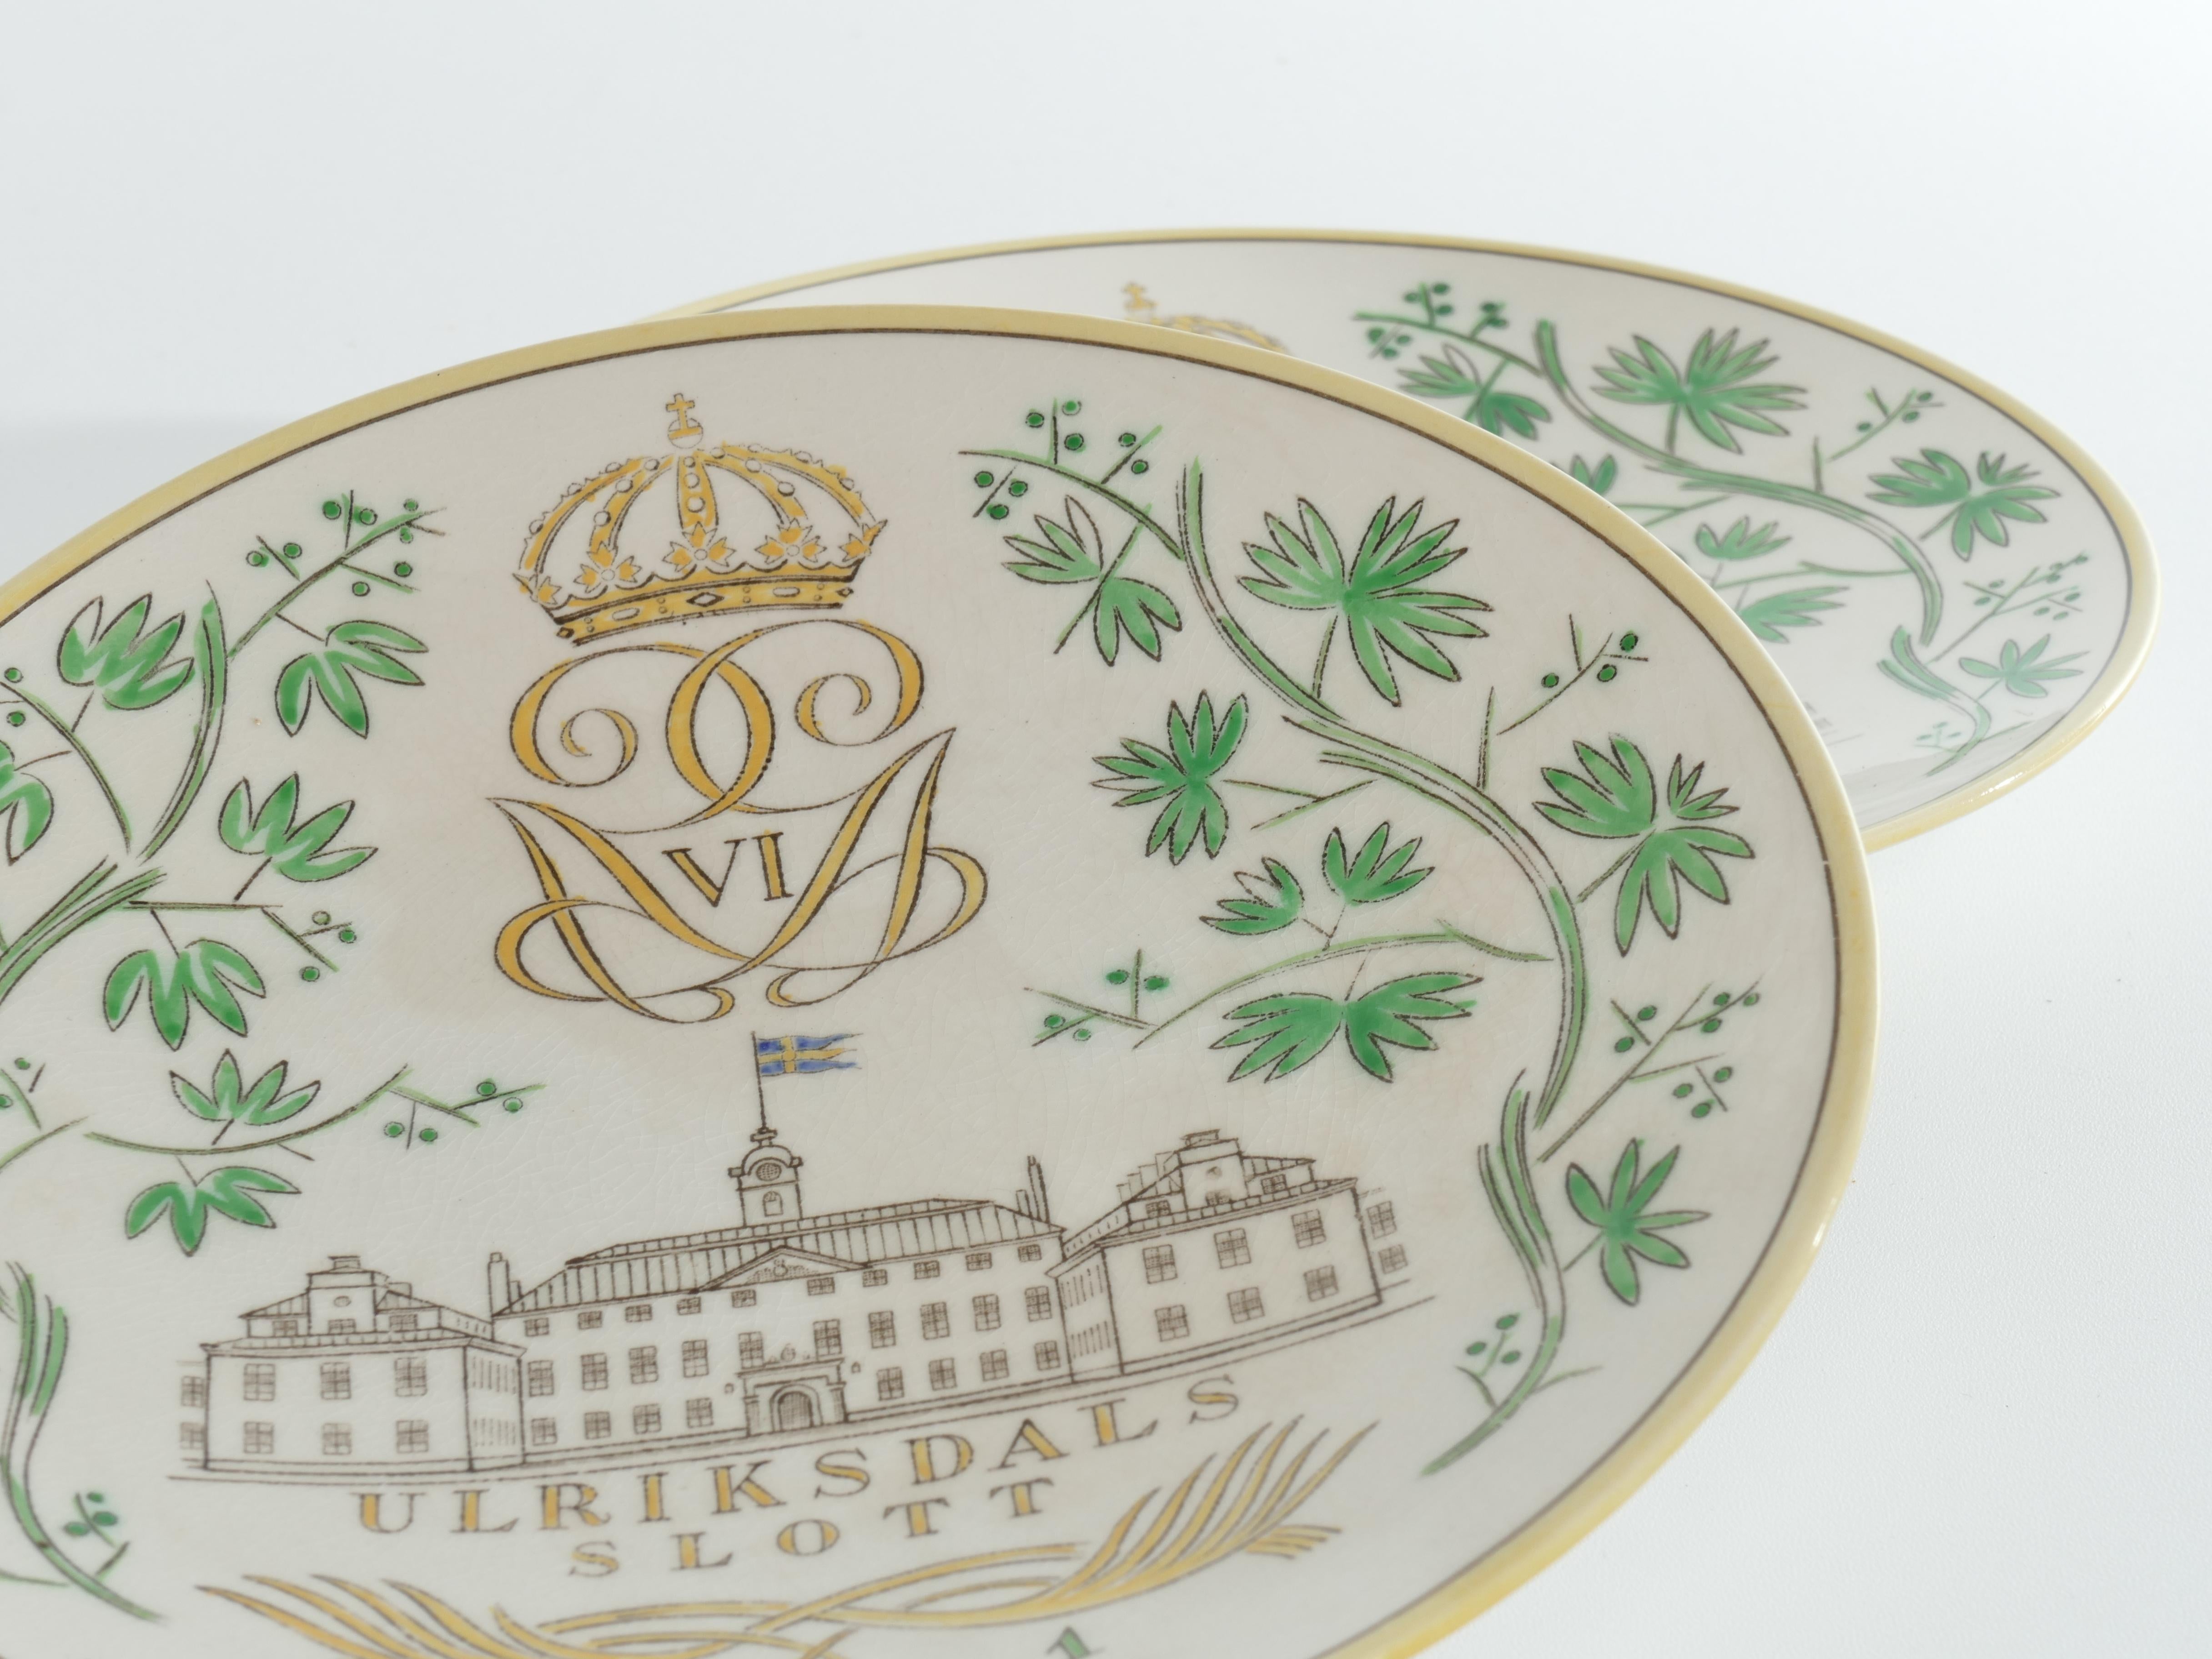 Stoneware Swedish Grace Plates with Ulriksdal Palace in Yellow and Green by Gefle 1951 For Sale